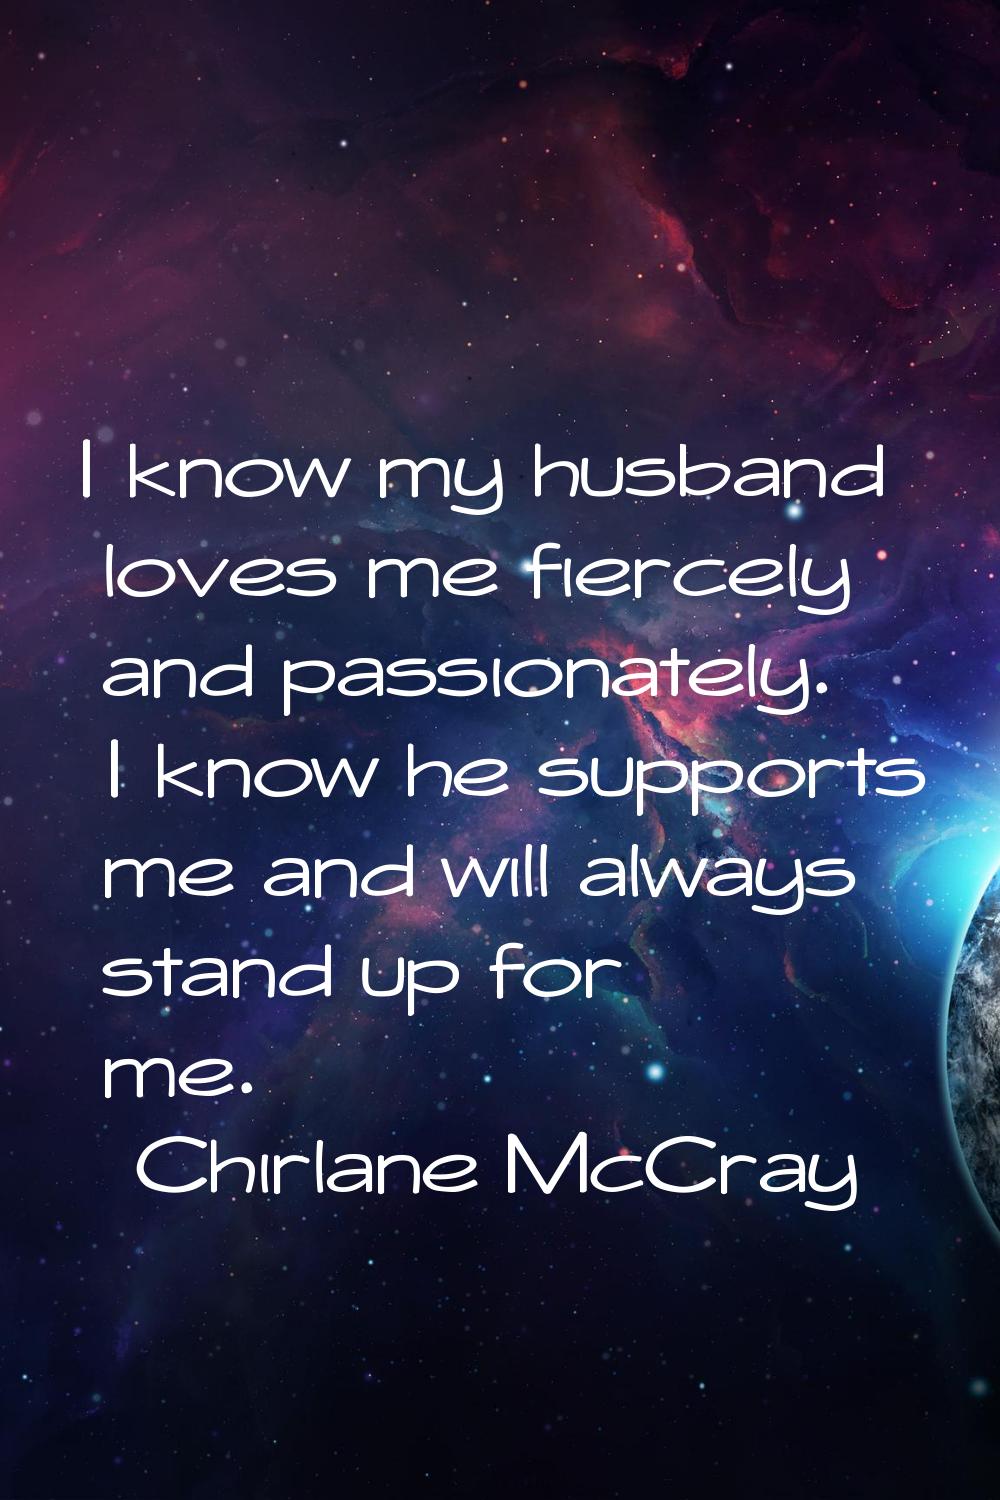 I know my husband loves me fiercely and passionately. I know he supports me and will always stand u